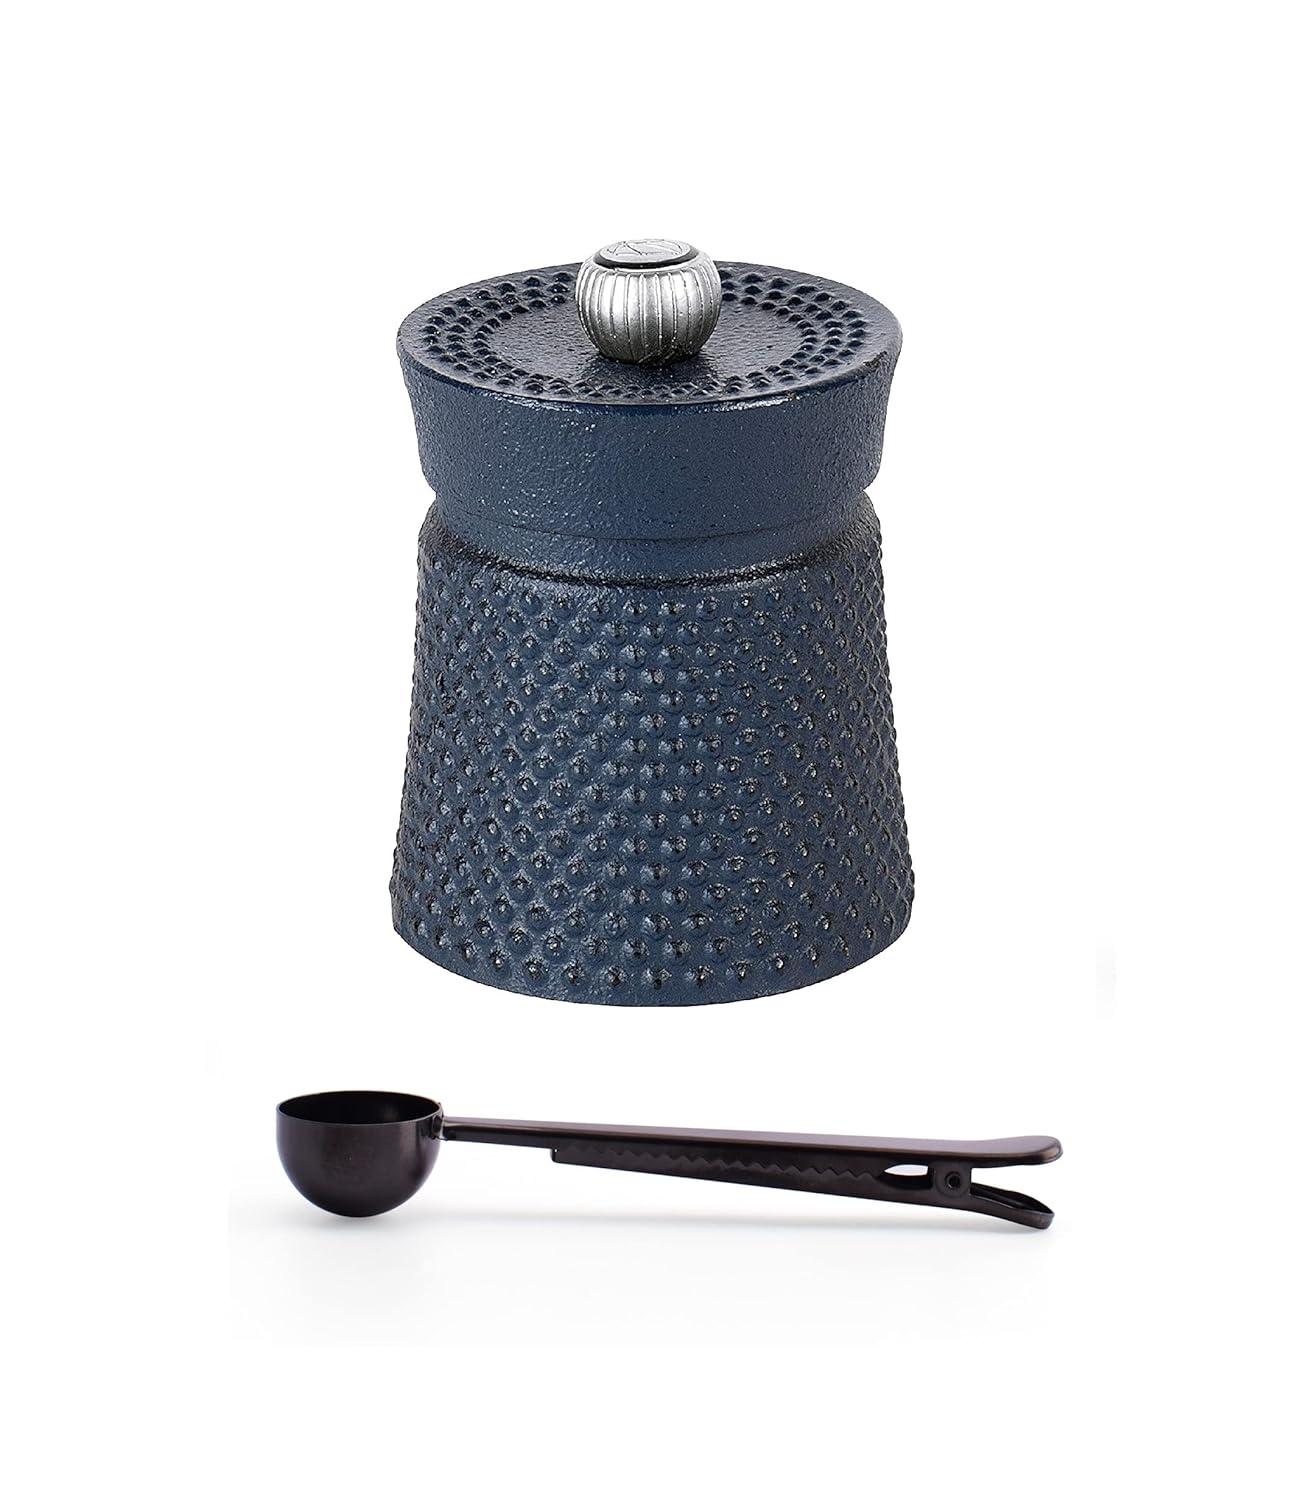 Peugeot BALI FONTE Cast Iron Pepper Mill, 8cm/3 In, With Stainless Steel Spice Scoop/Bag Clip (Blue)